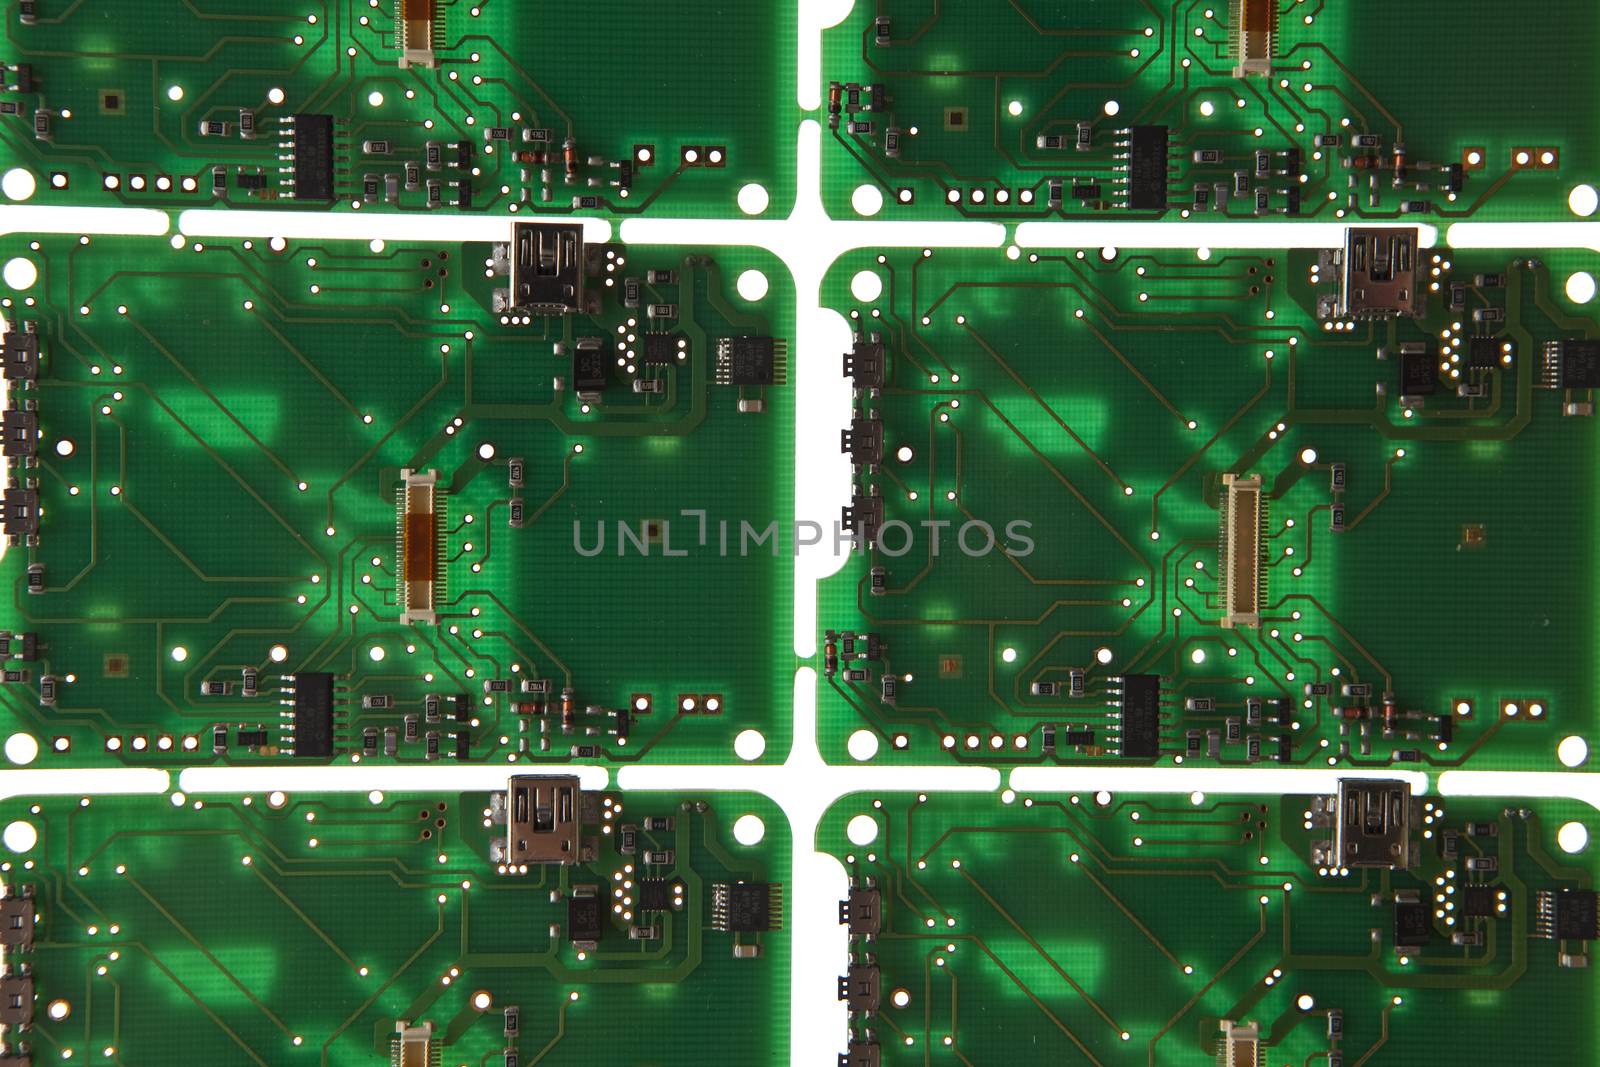 printed circuit plate on white background